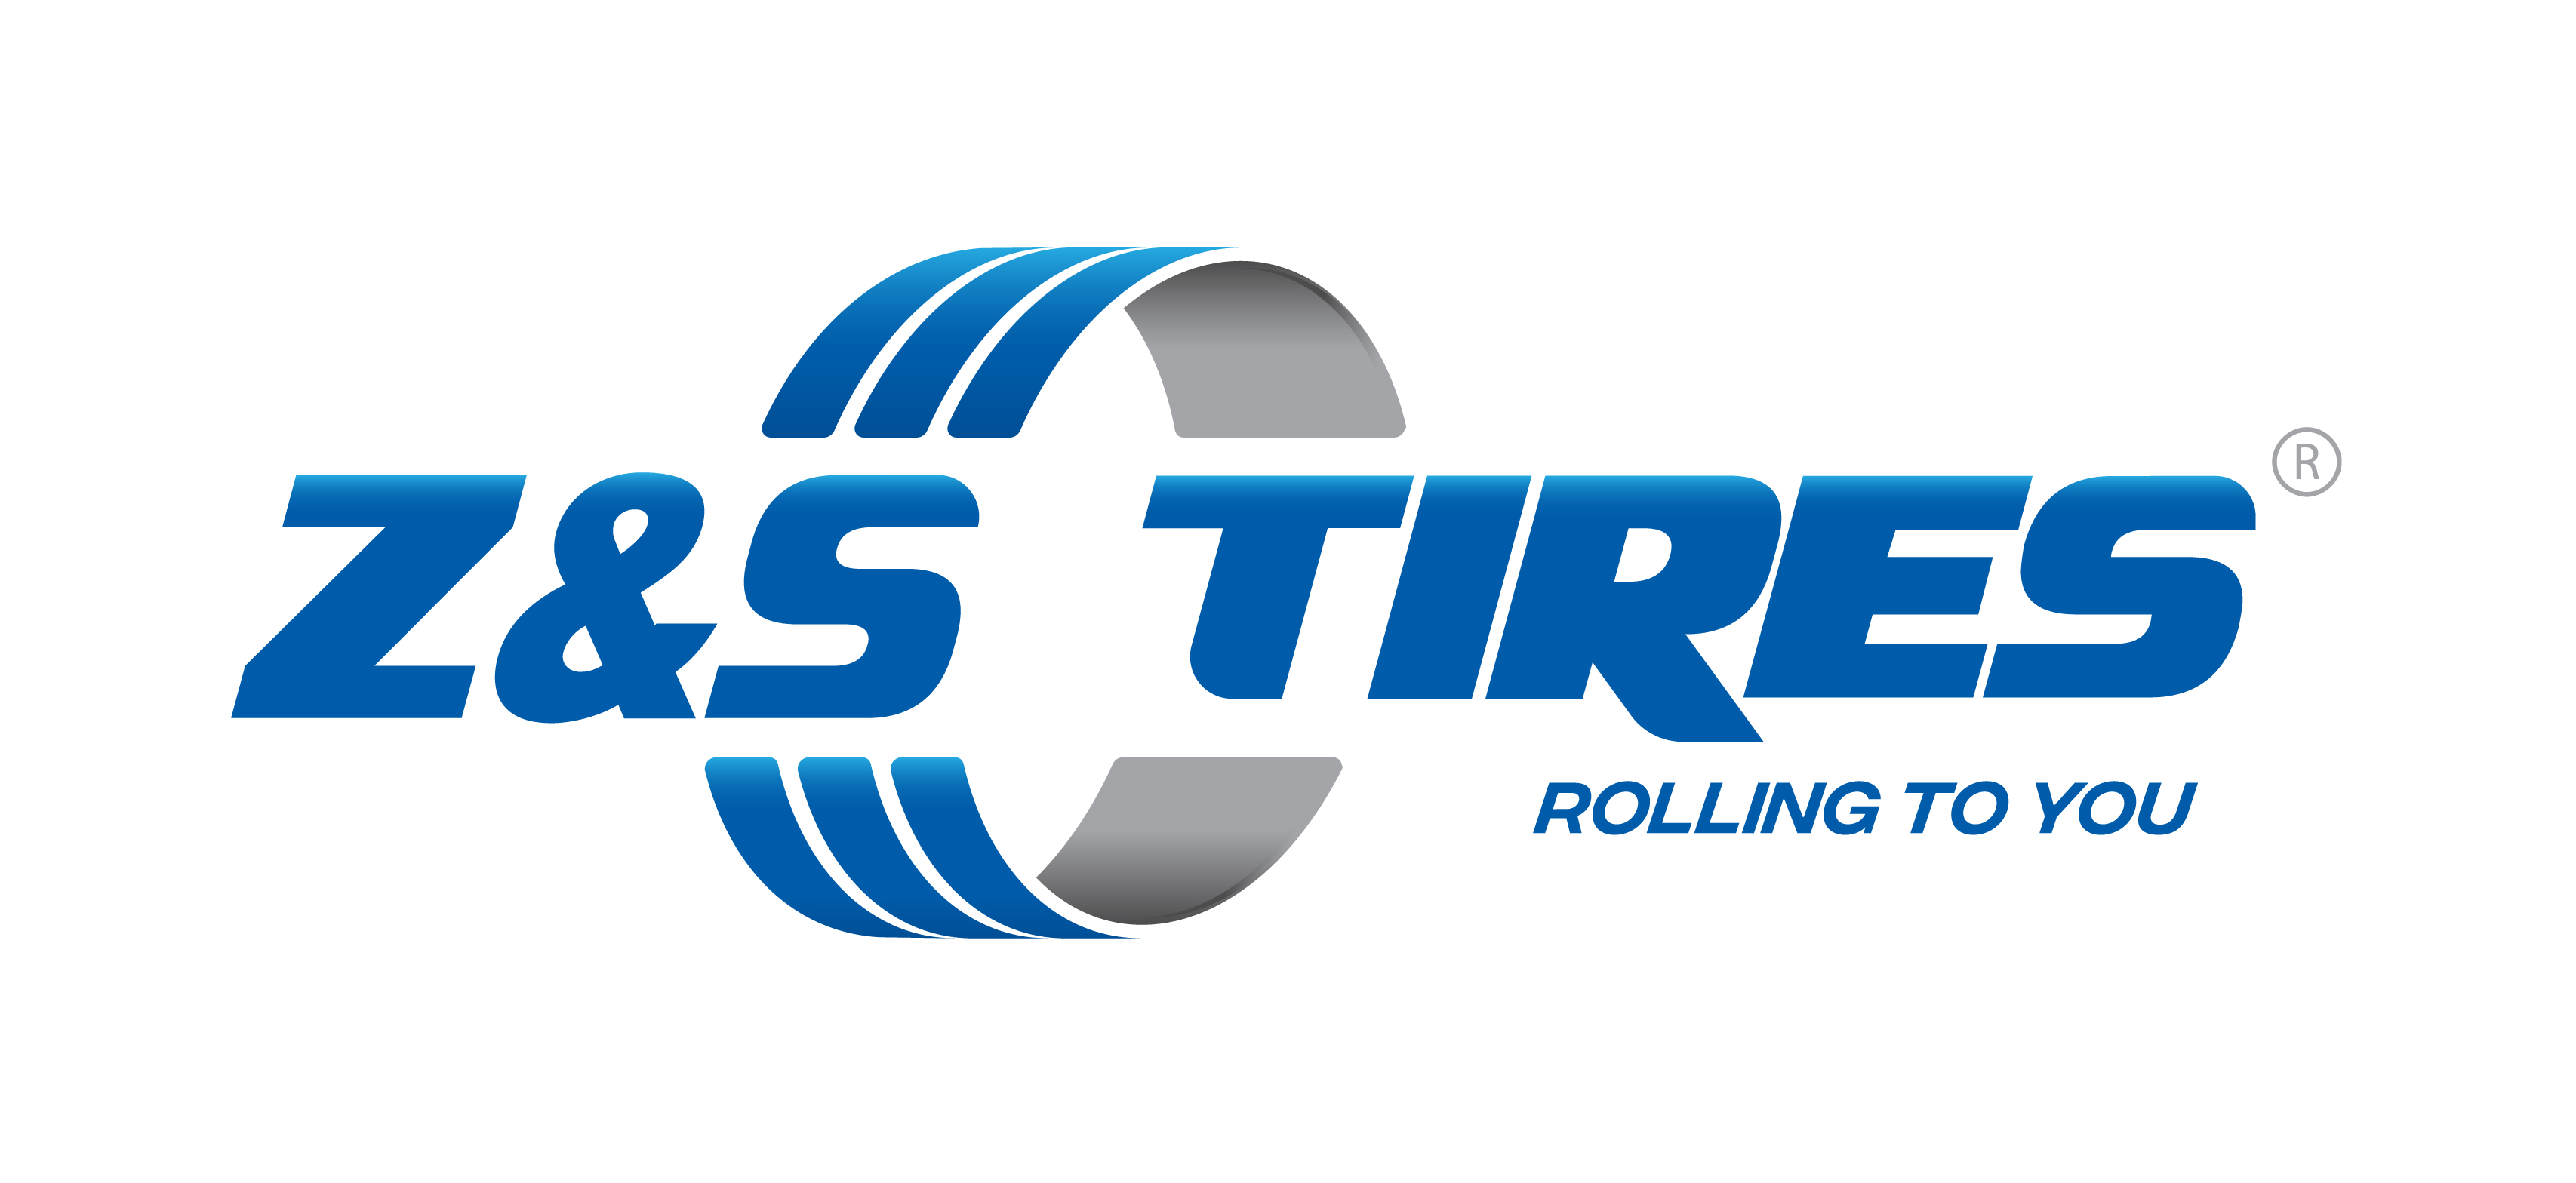 Welcome To Super tires 